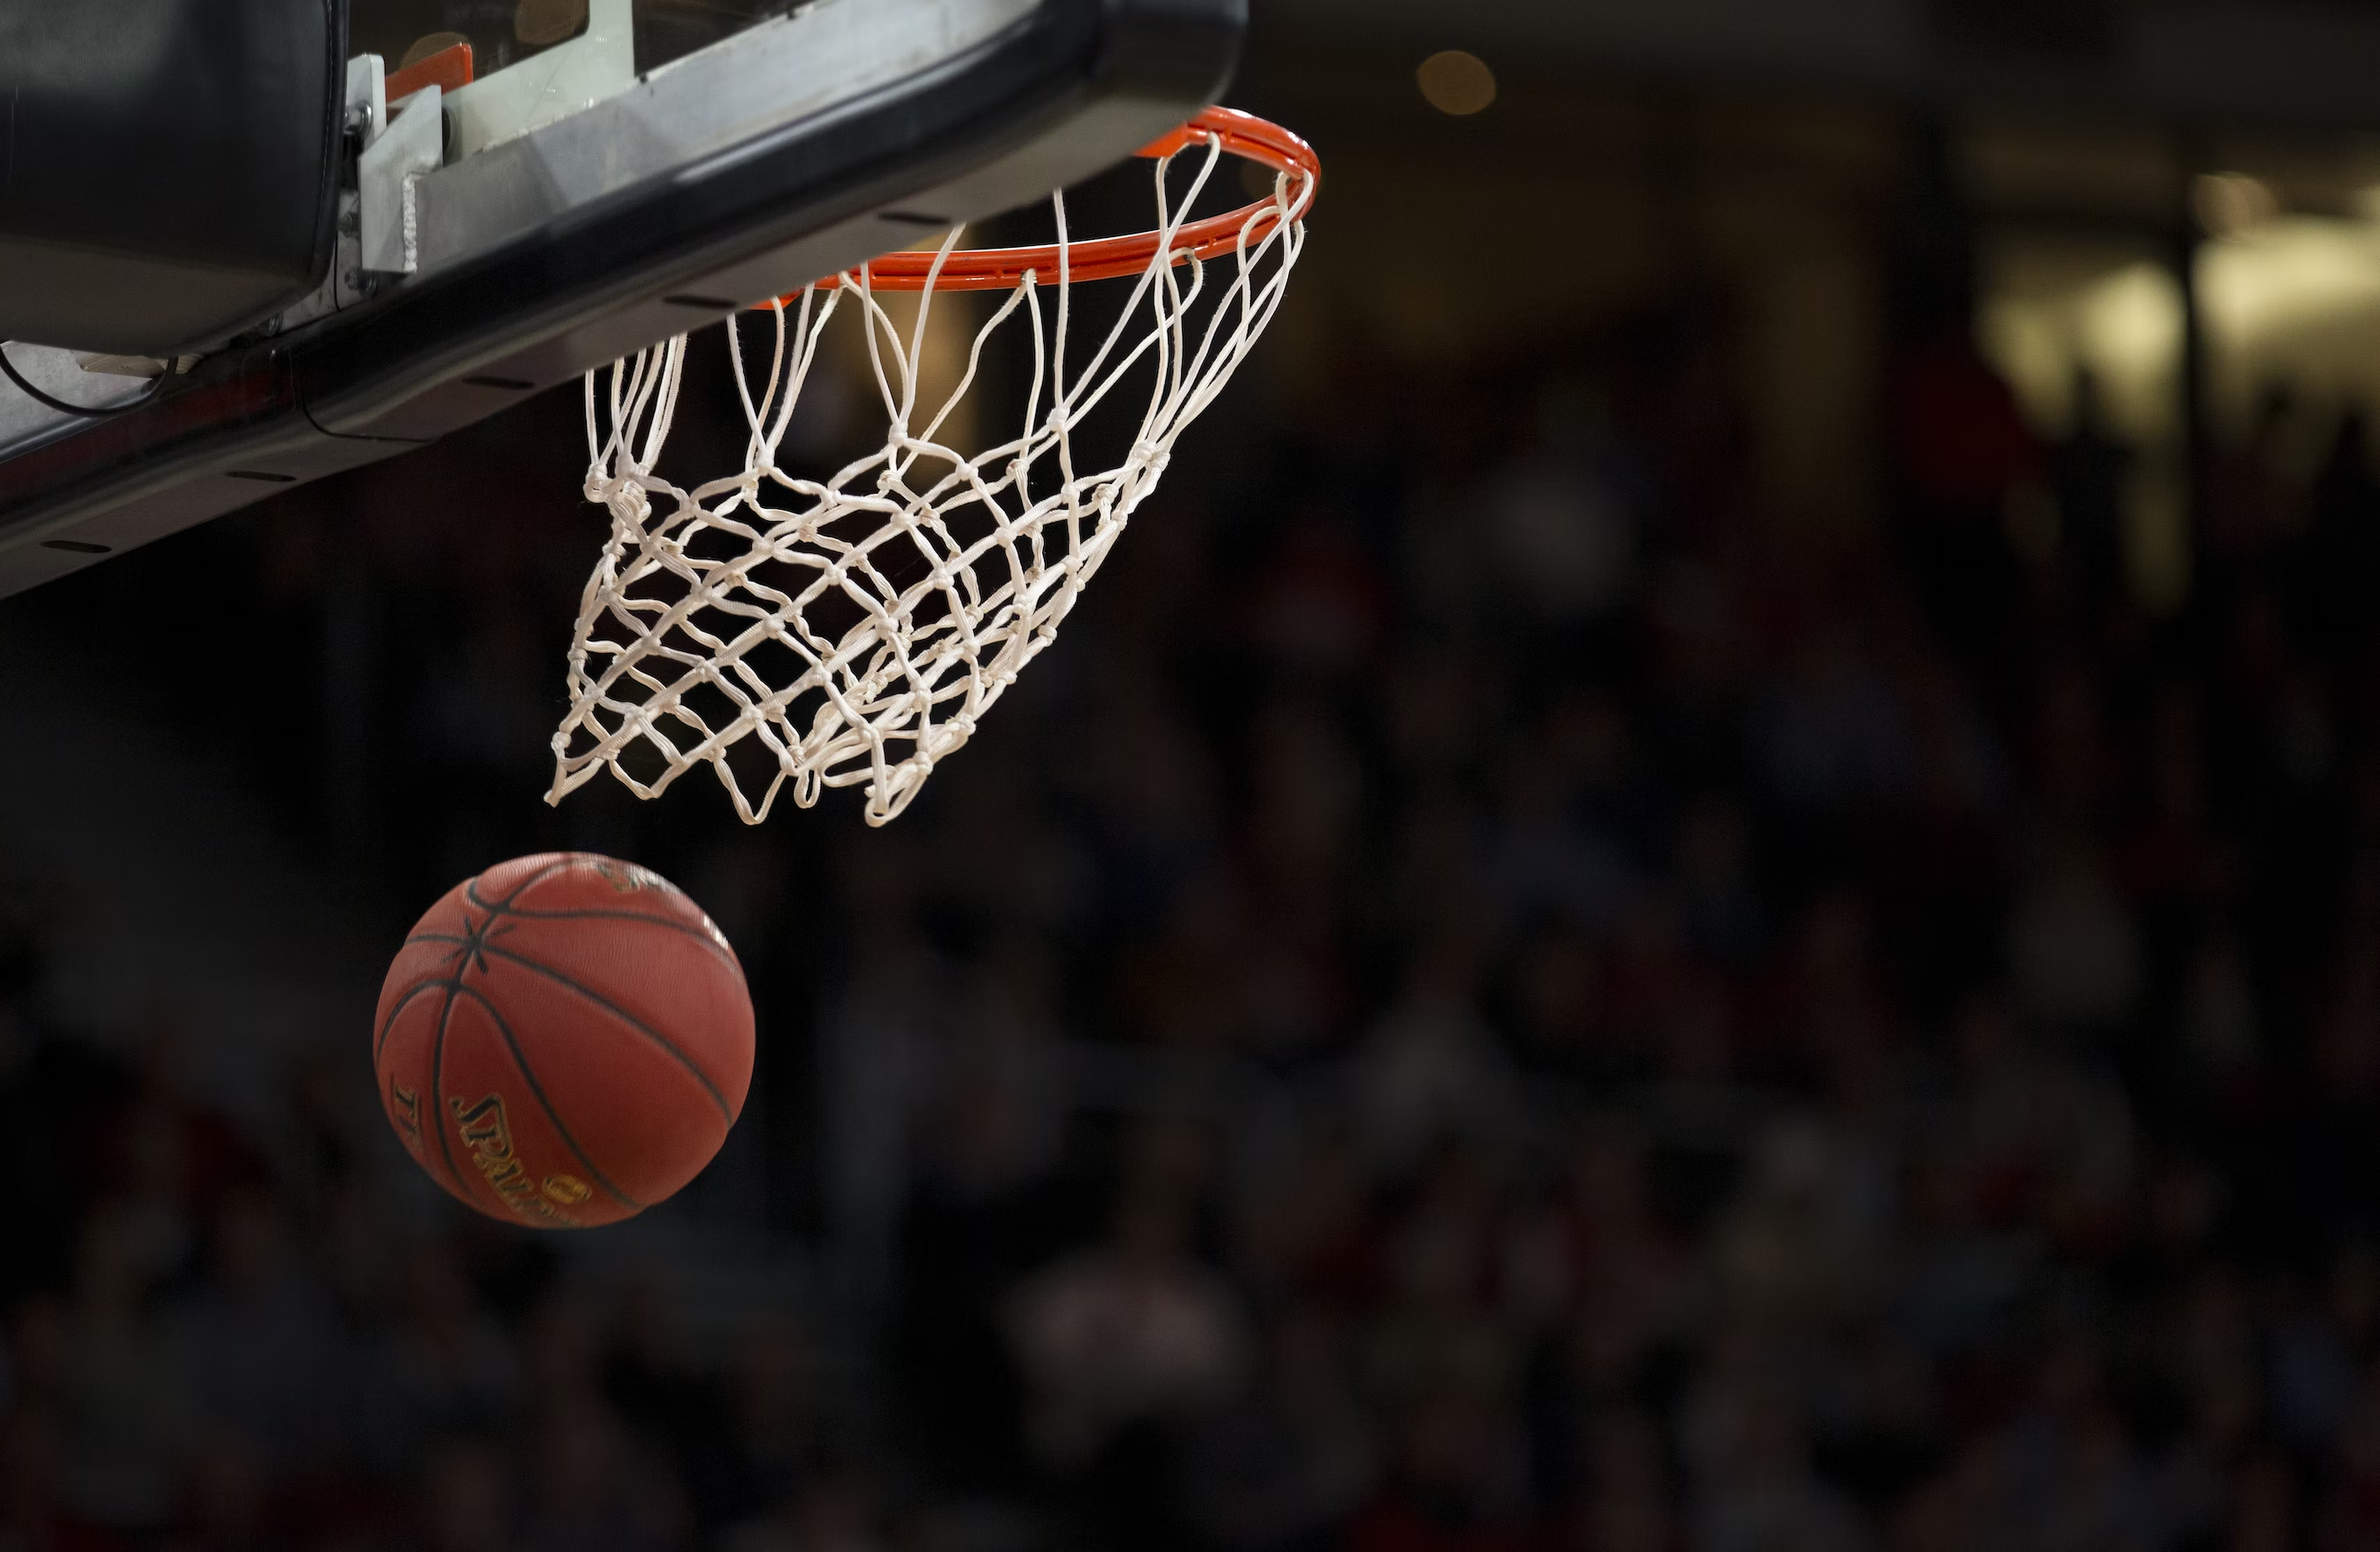 Charting New Norms: March Madness Marketing in a Cookie-Free Era